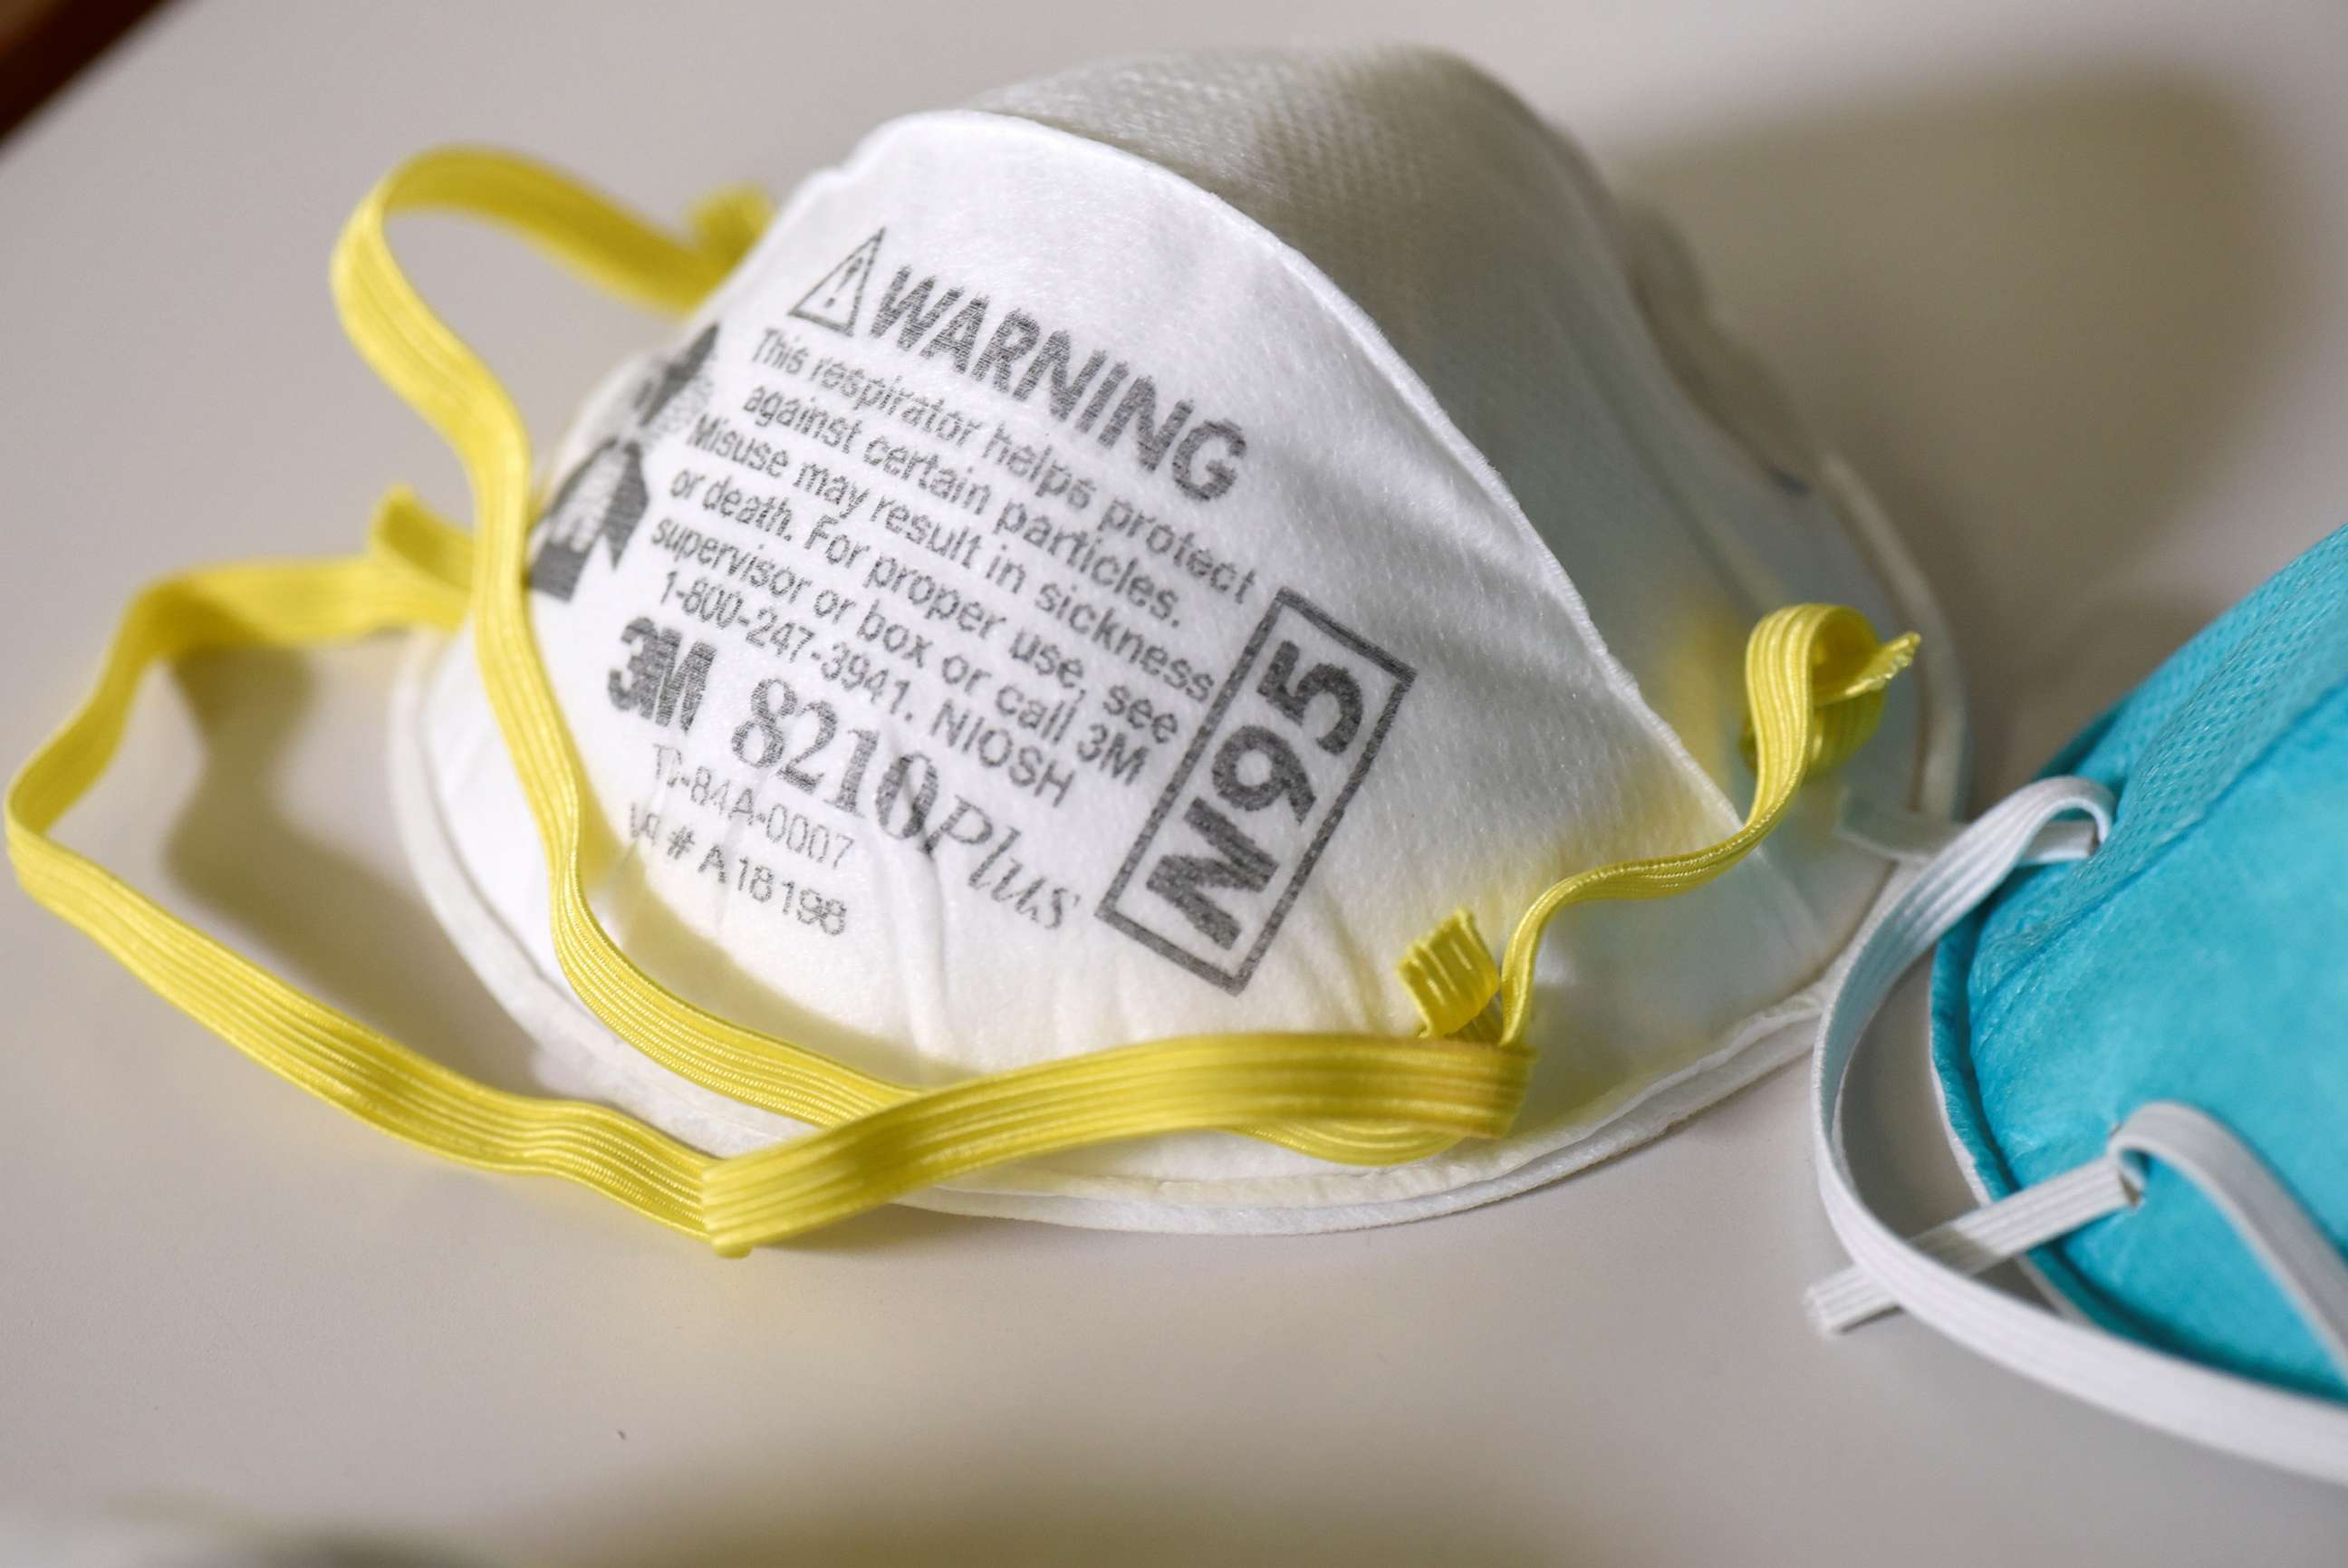 PHOTO: In this March 4, 2020, file photo, various N95 respiration masks are shown at a laboratory of 3M.